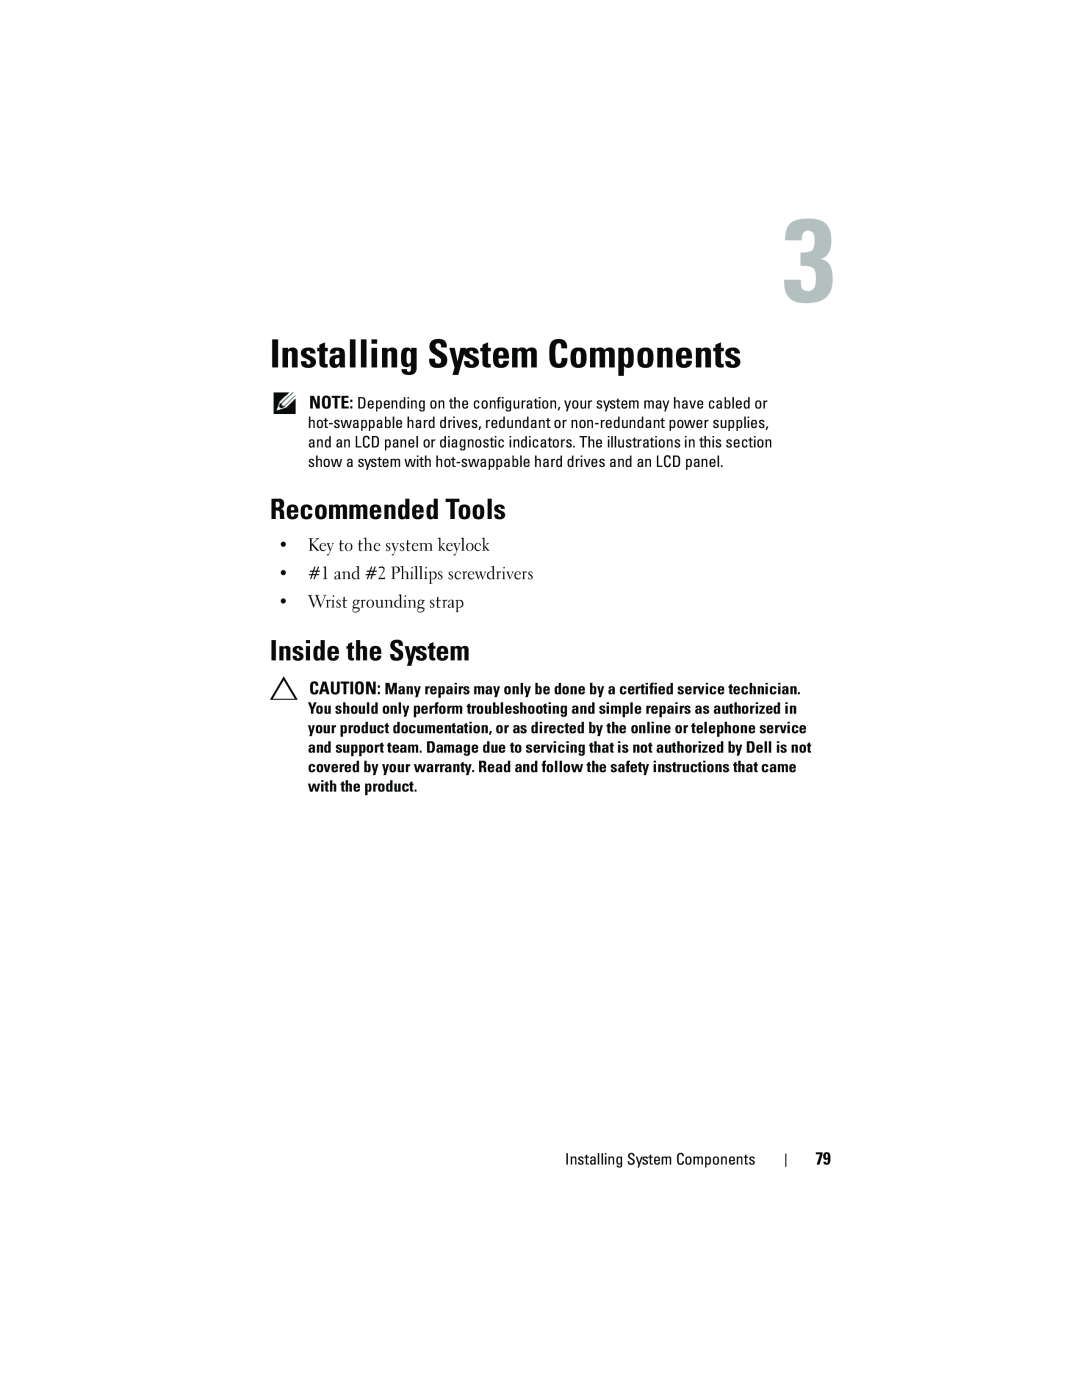 Dell T310 owner manual Installing System Components, Recommended Tools, Inside the System 